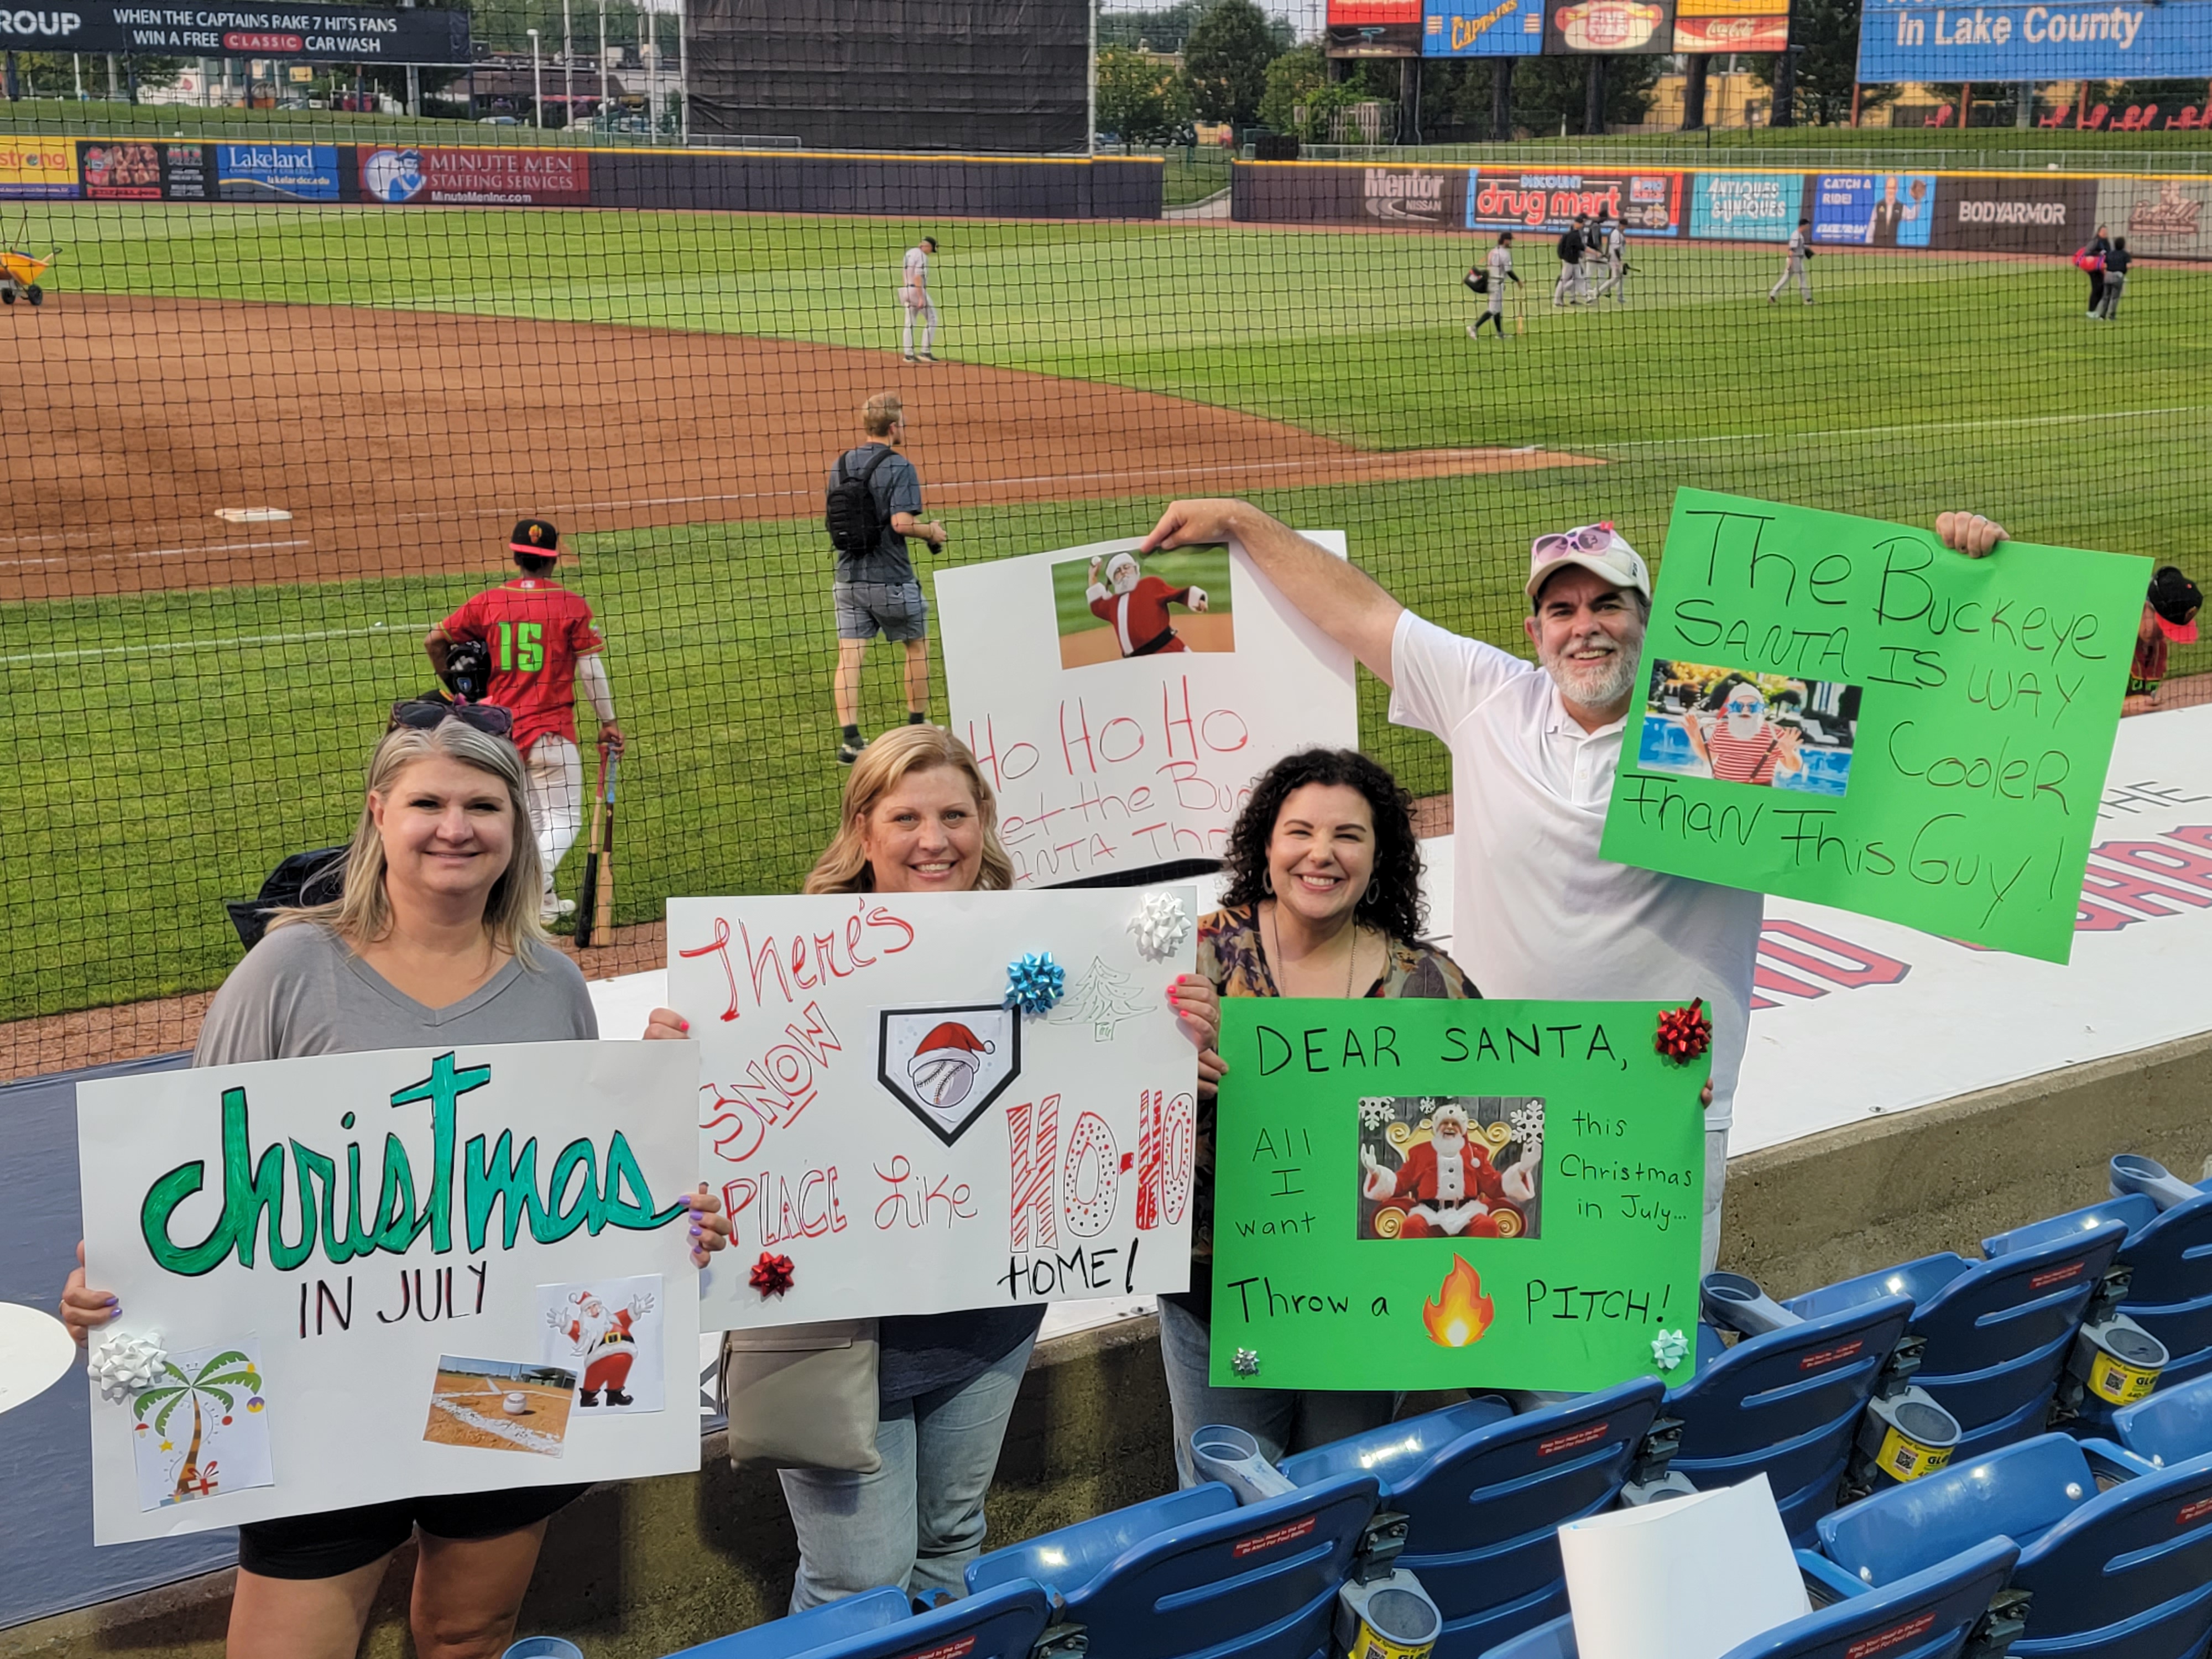 LFG Celebrates Christmas in July with Santa at Captains game